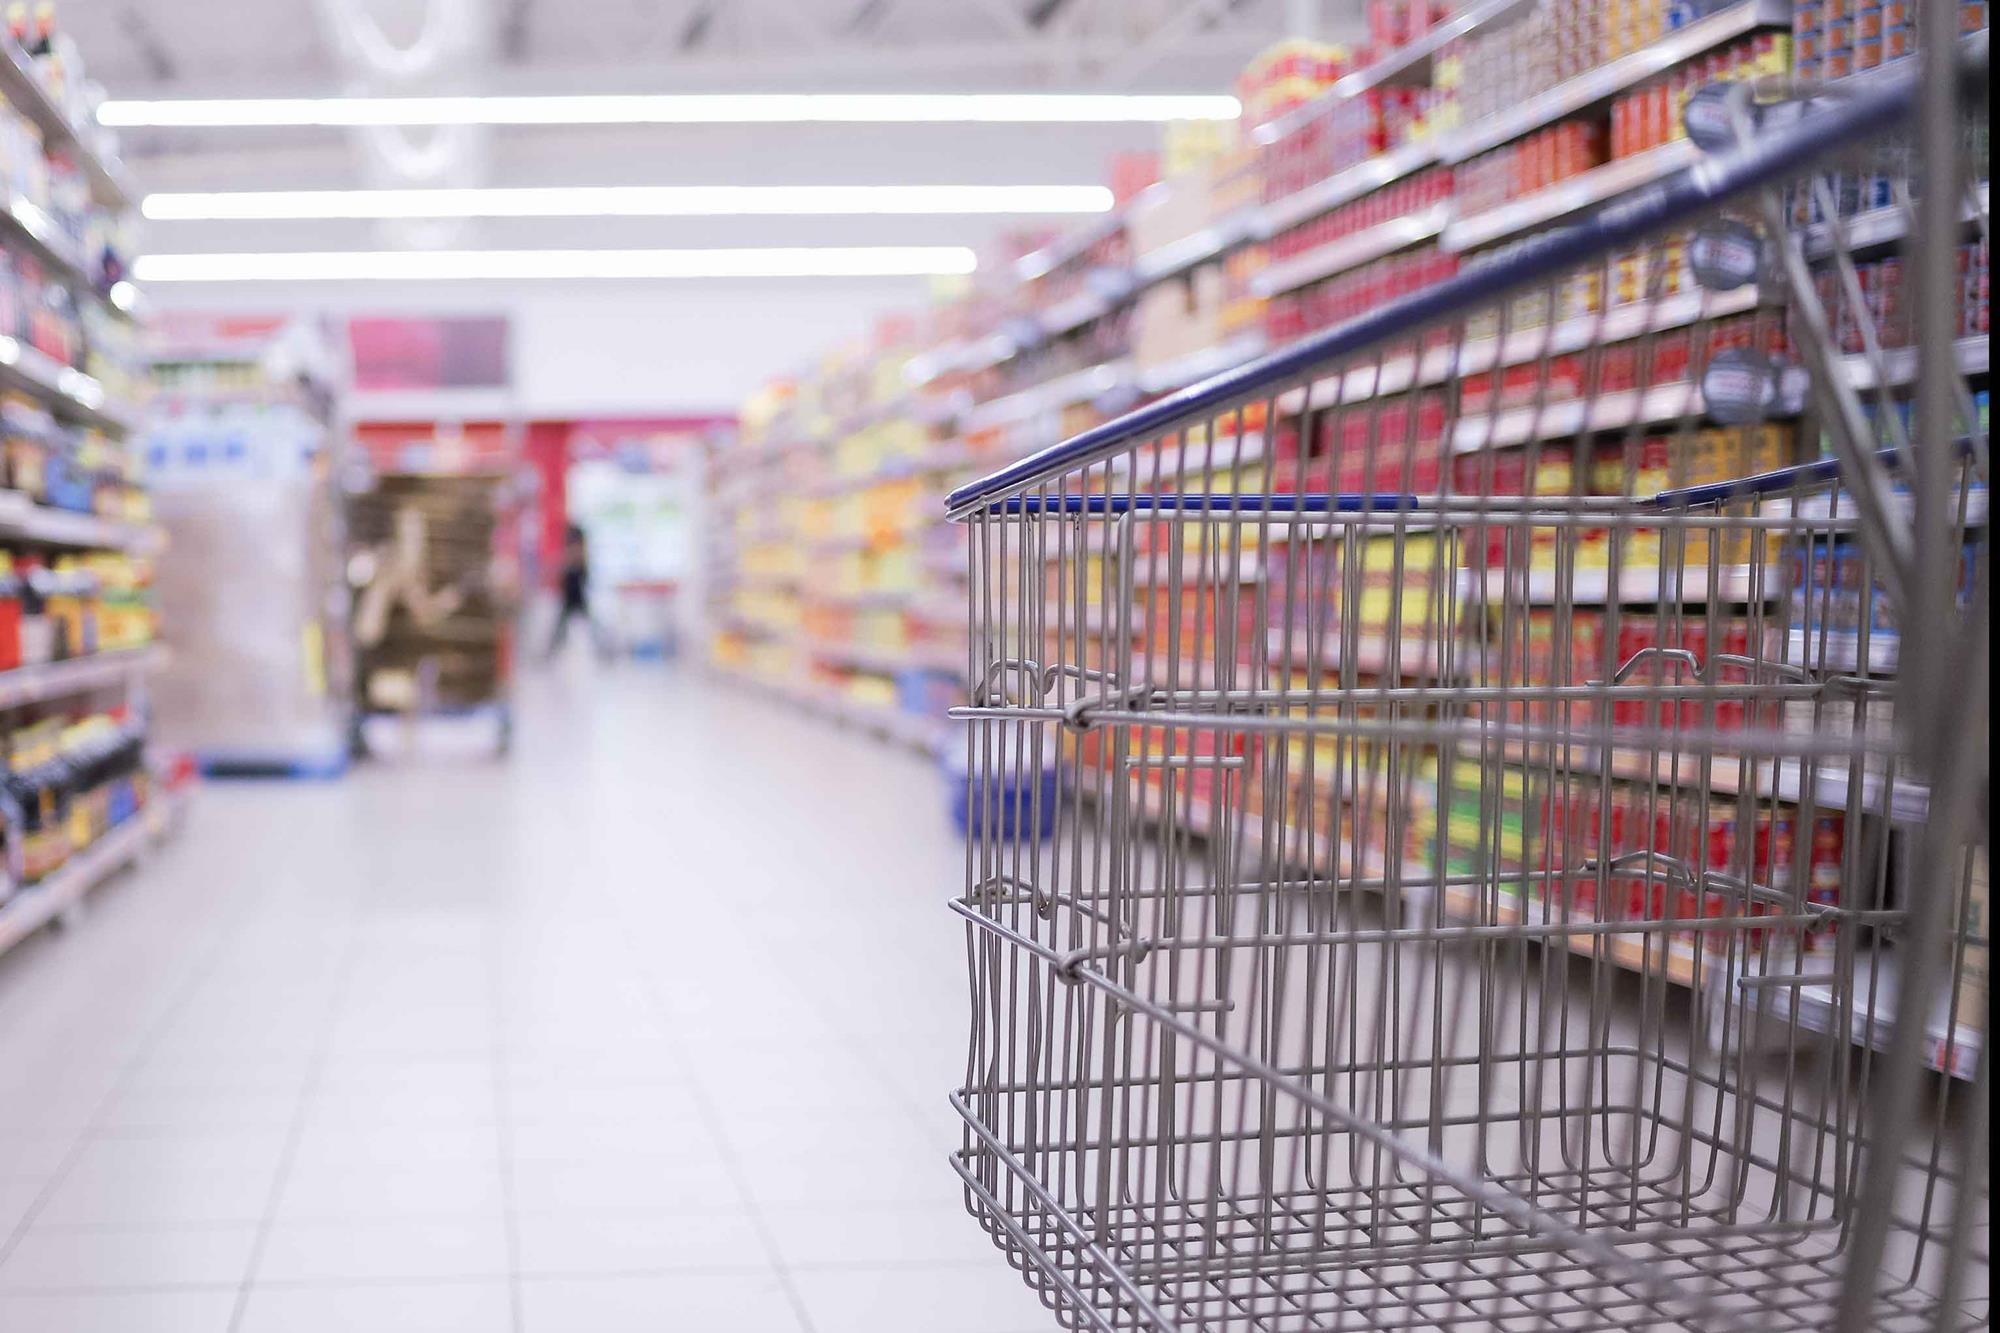 Tesco Everyday Value: What does this mean for the grocer?, Analysis